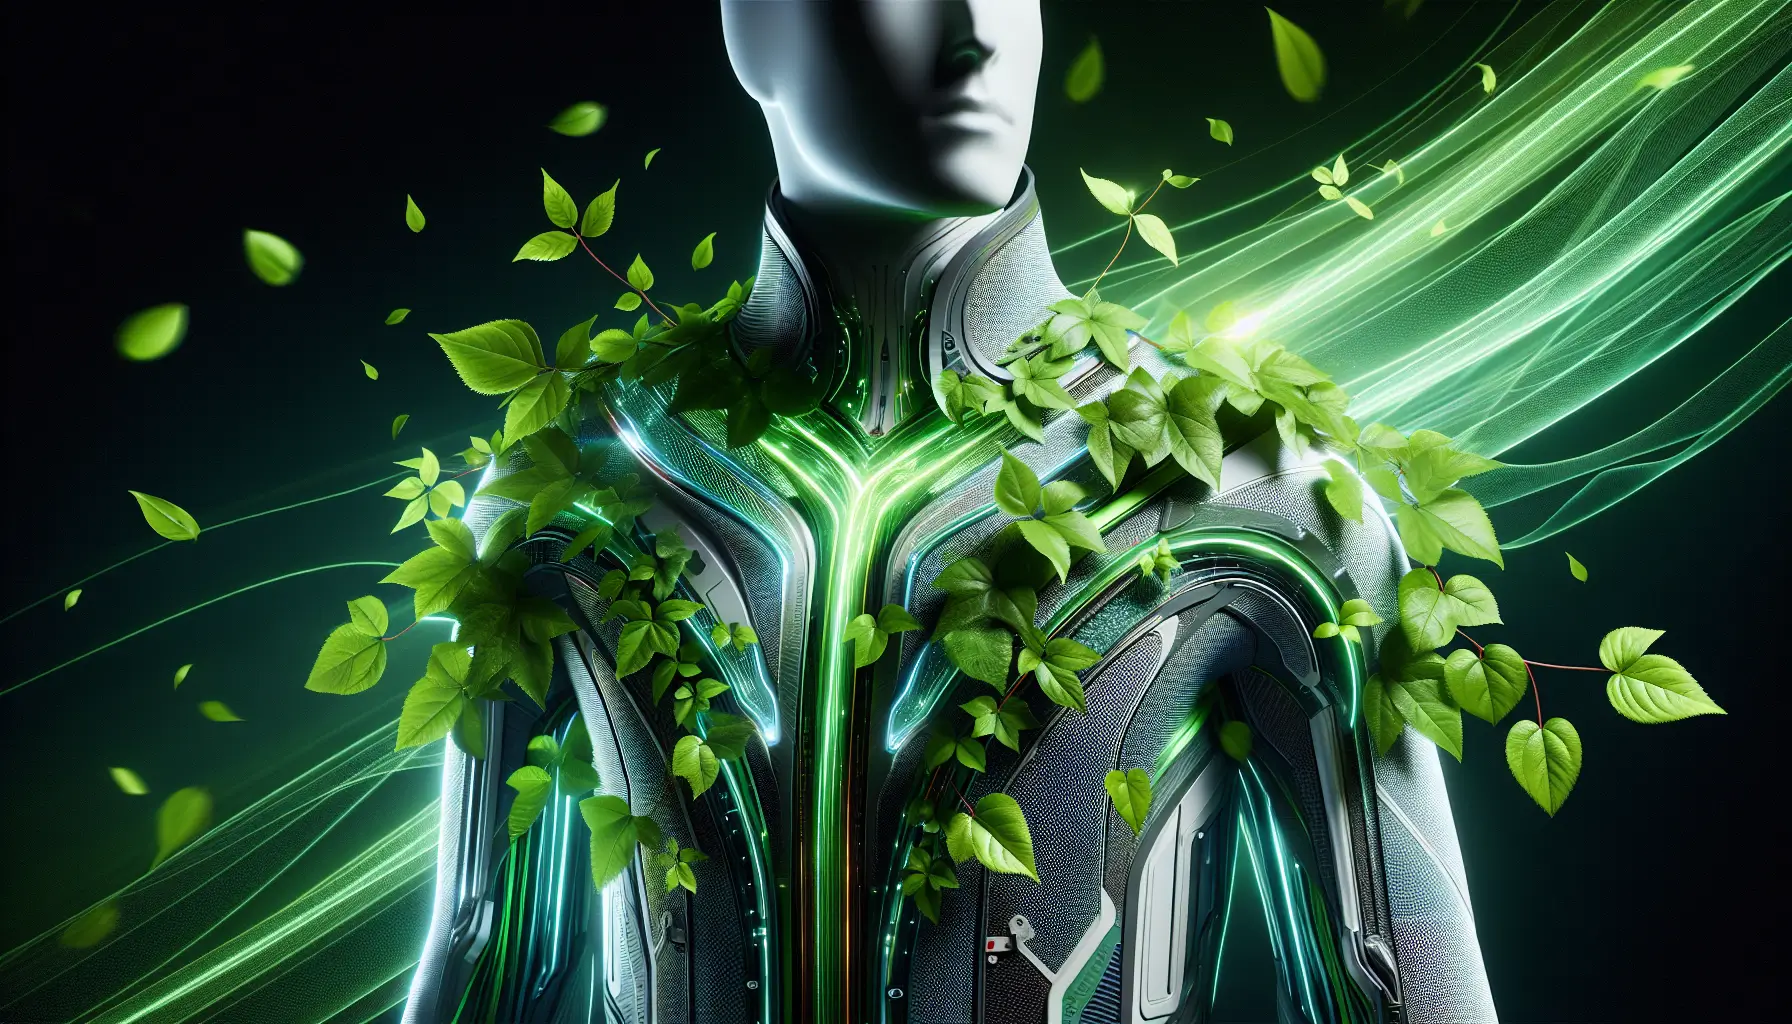 Technology & Innovation in Sustainable Fashion: a captivating featured image that blends futuristic technology with eco-friendly elements. Picture a sleek, modern garment intertwined with green vines or leaves, symbolizing sustainability. Use a clean and vibrant color palette to convey a sense of innovation and style.